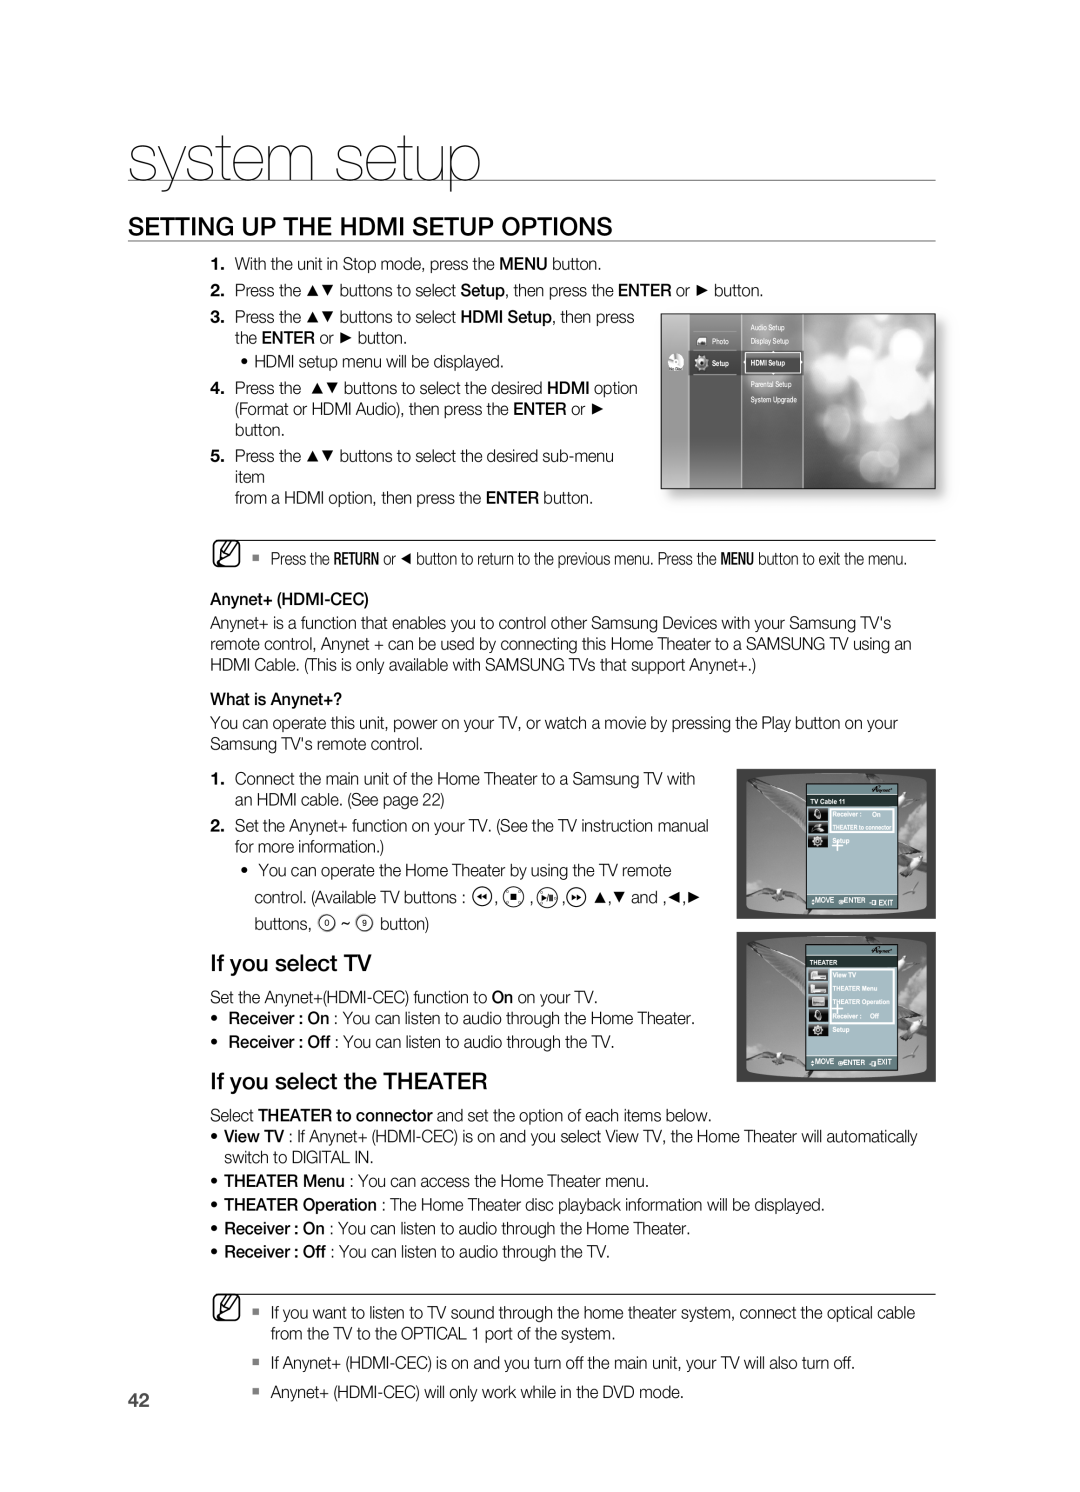 Samsung HT-BD2 manual Setting Up The Hdmi Setup Options, If you select TV, If you select the THEATER, system setup 